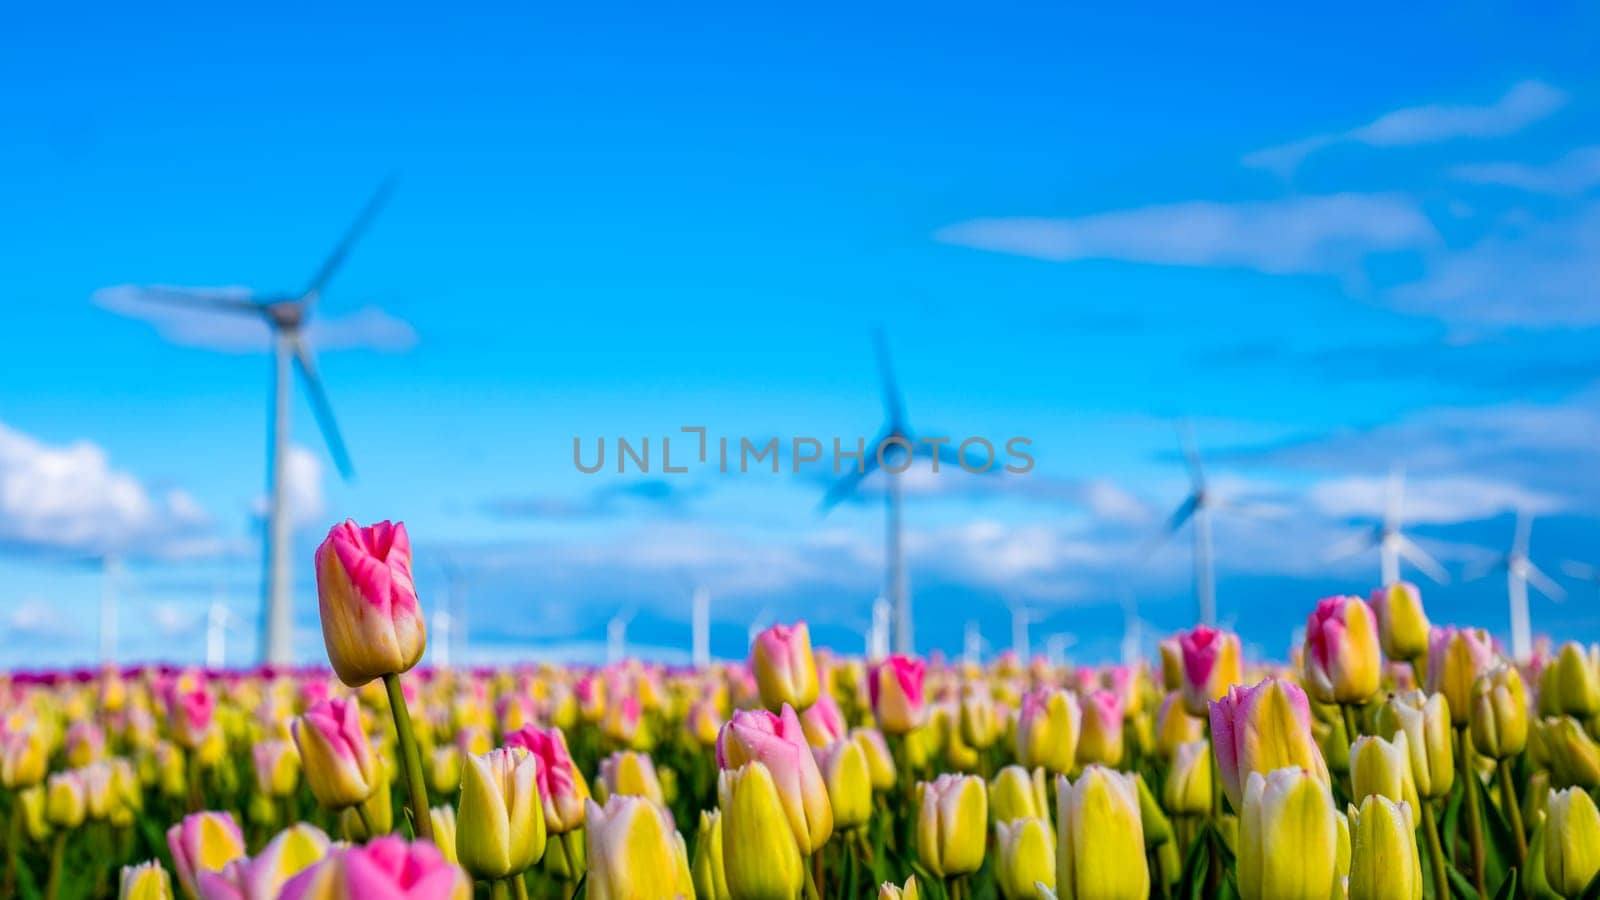 A vibrant field of tulips stretches endlessly, with majestic windmills towering in the background, spinning gracefully in the spring breeze. in the Noordoostpolder Netherlands